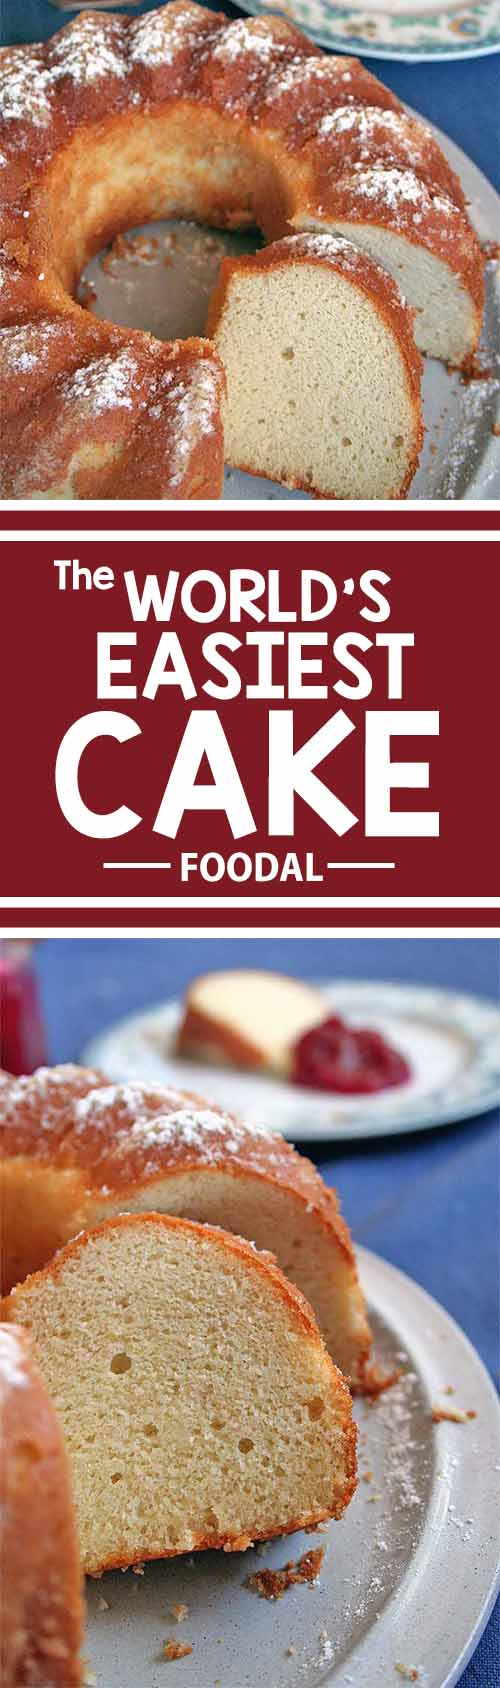 A cake with only two ingredients? It’s possible with this easy-peasy recipe! Read on to find out what you need to make this indulgent treat, with a nutty flavor and a soft and moist texture. Baking has never been easier. Try Foodal’s recipe today! https://foodal.com/recipes/desserts/worlds-easiest-cake/